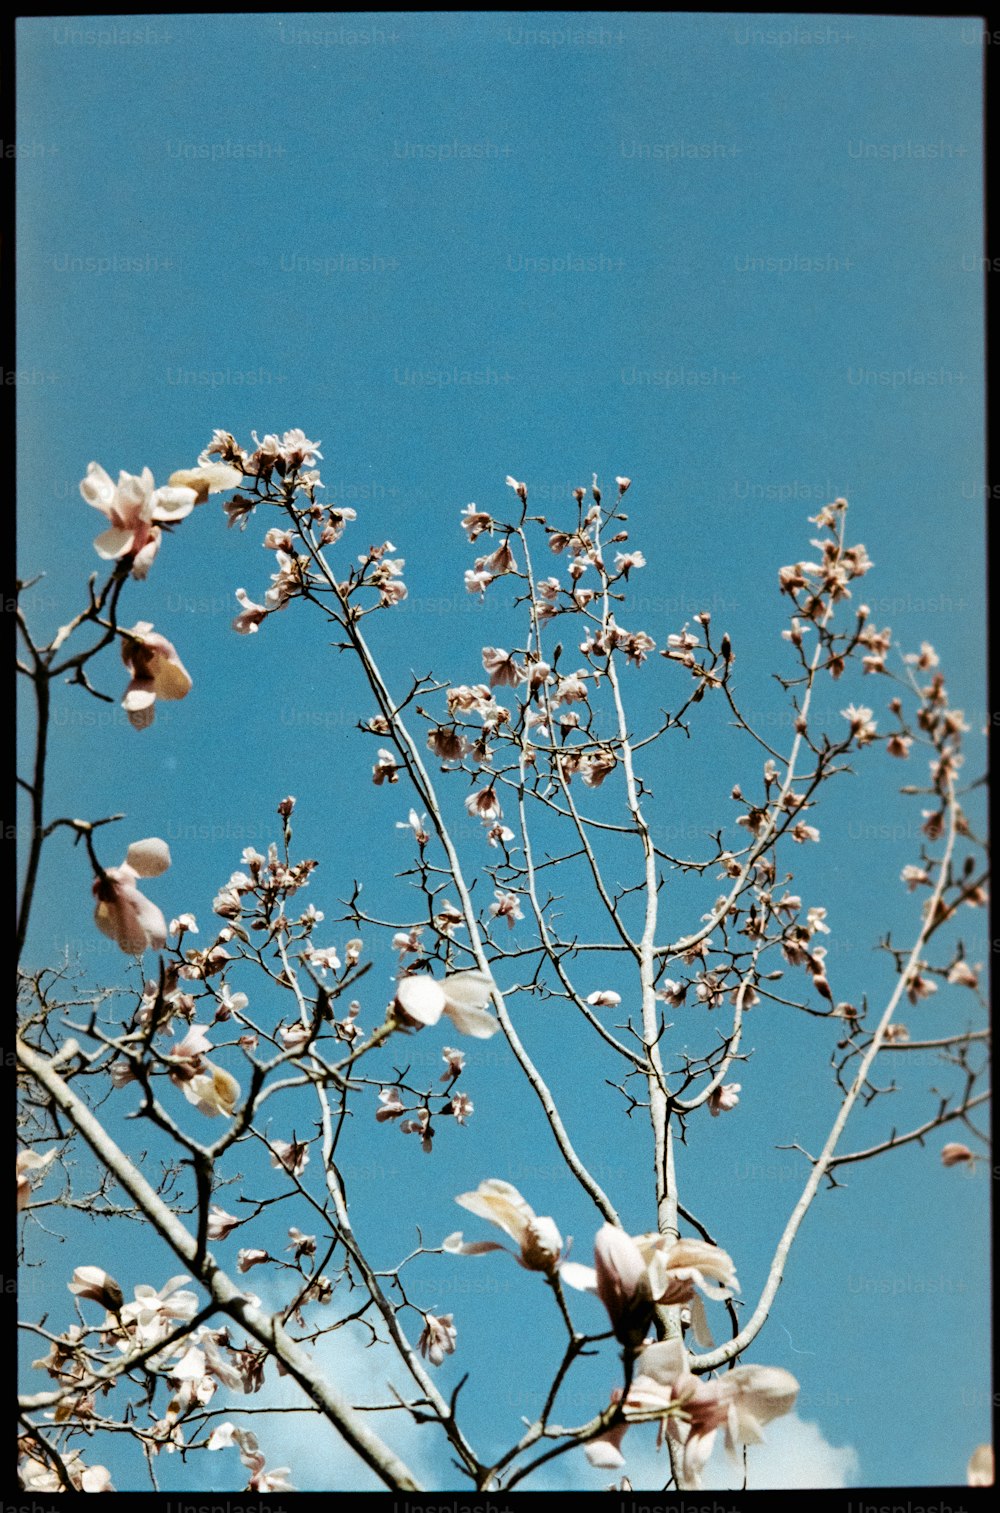 the branches of a tree with white flowers against a blue sky